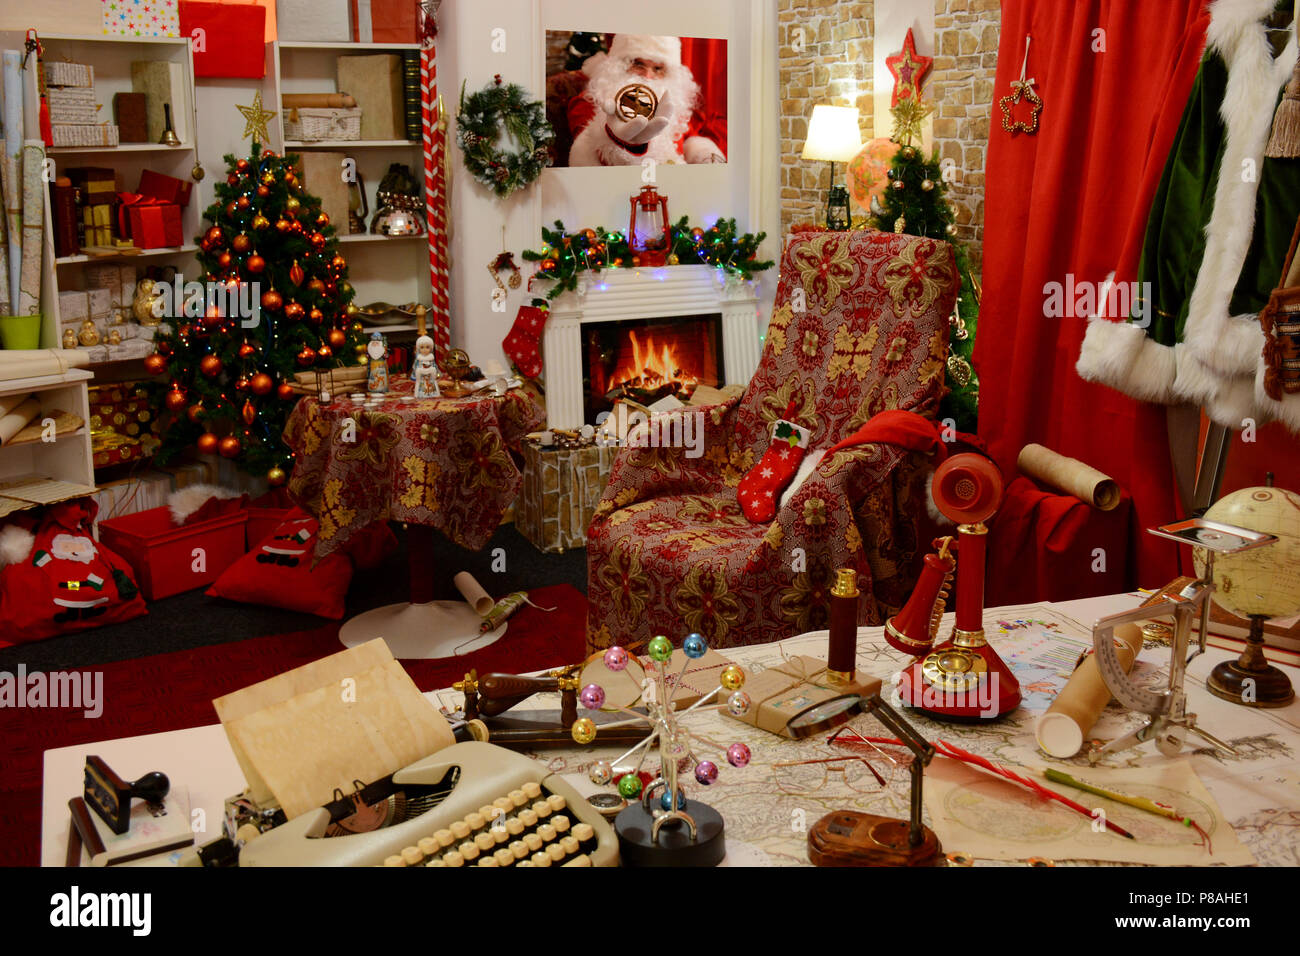 Picture Of Santa In The Living Room